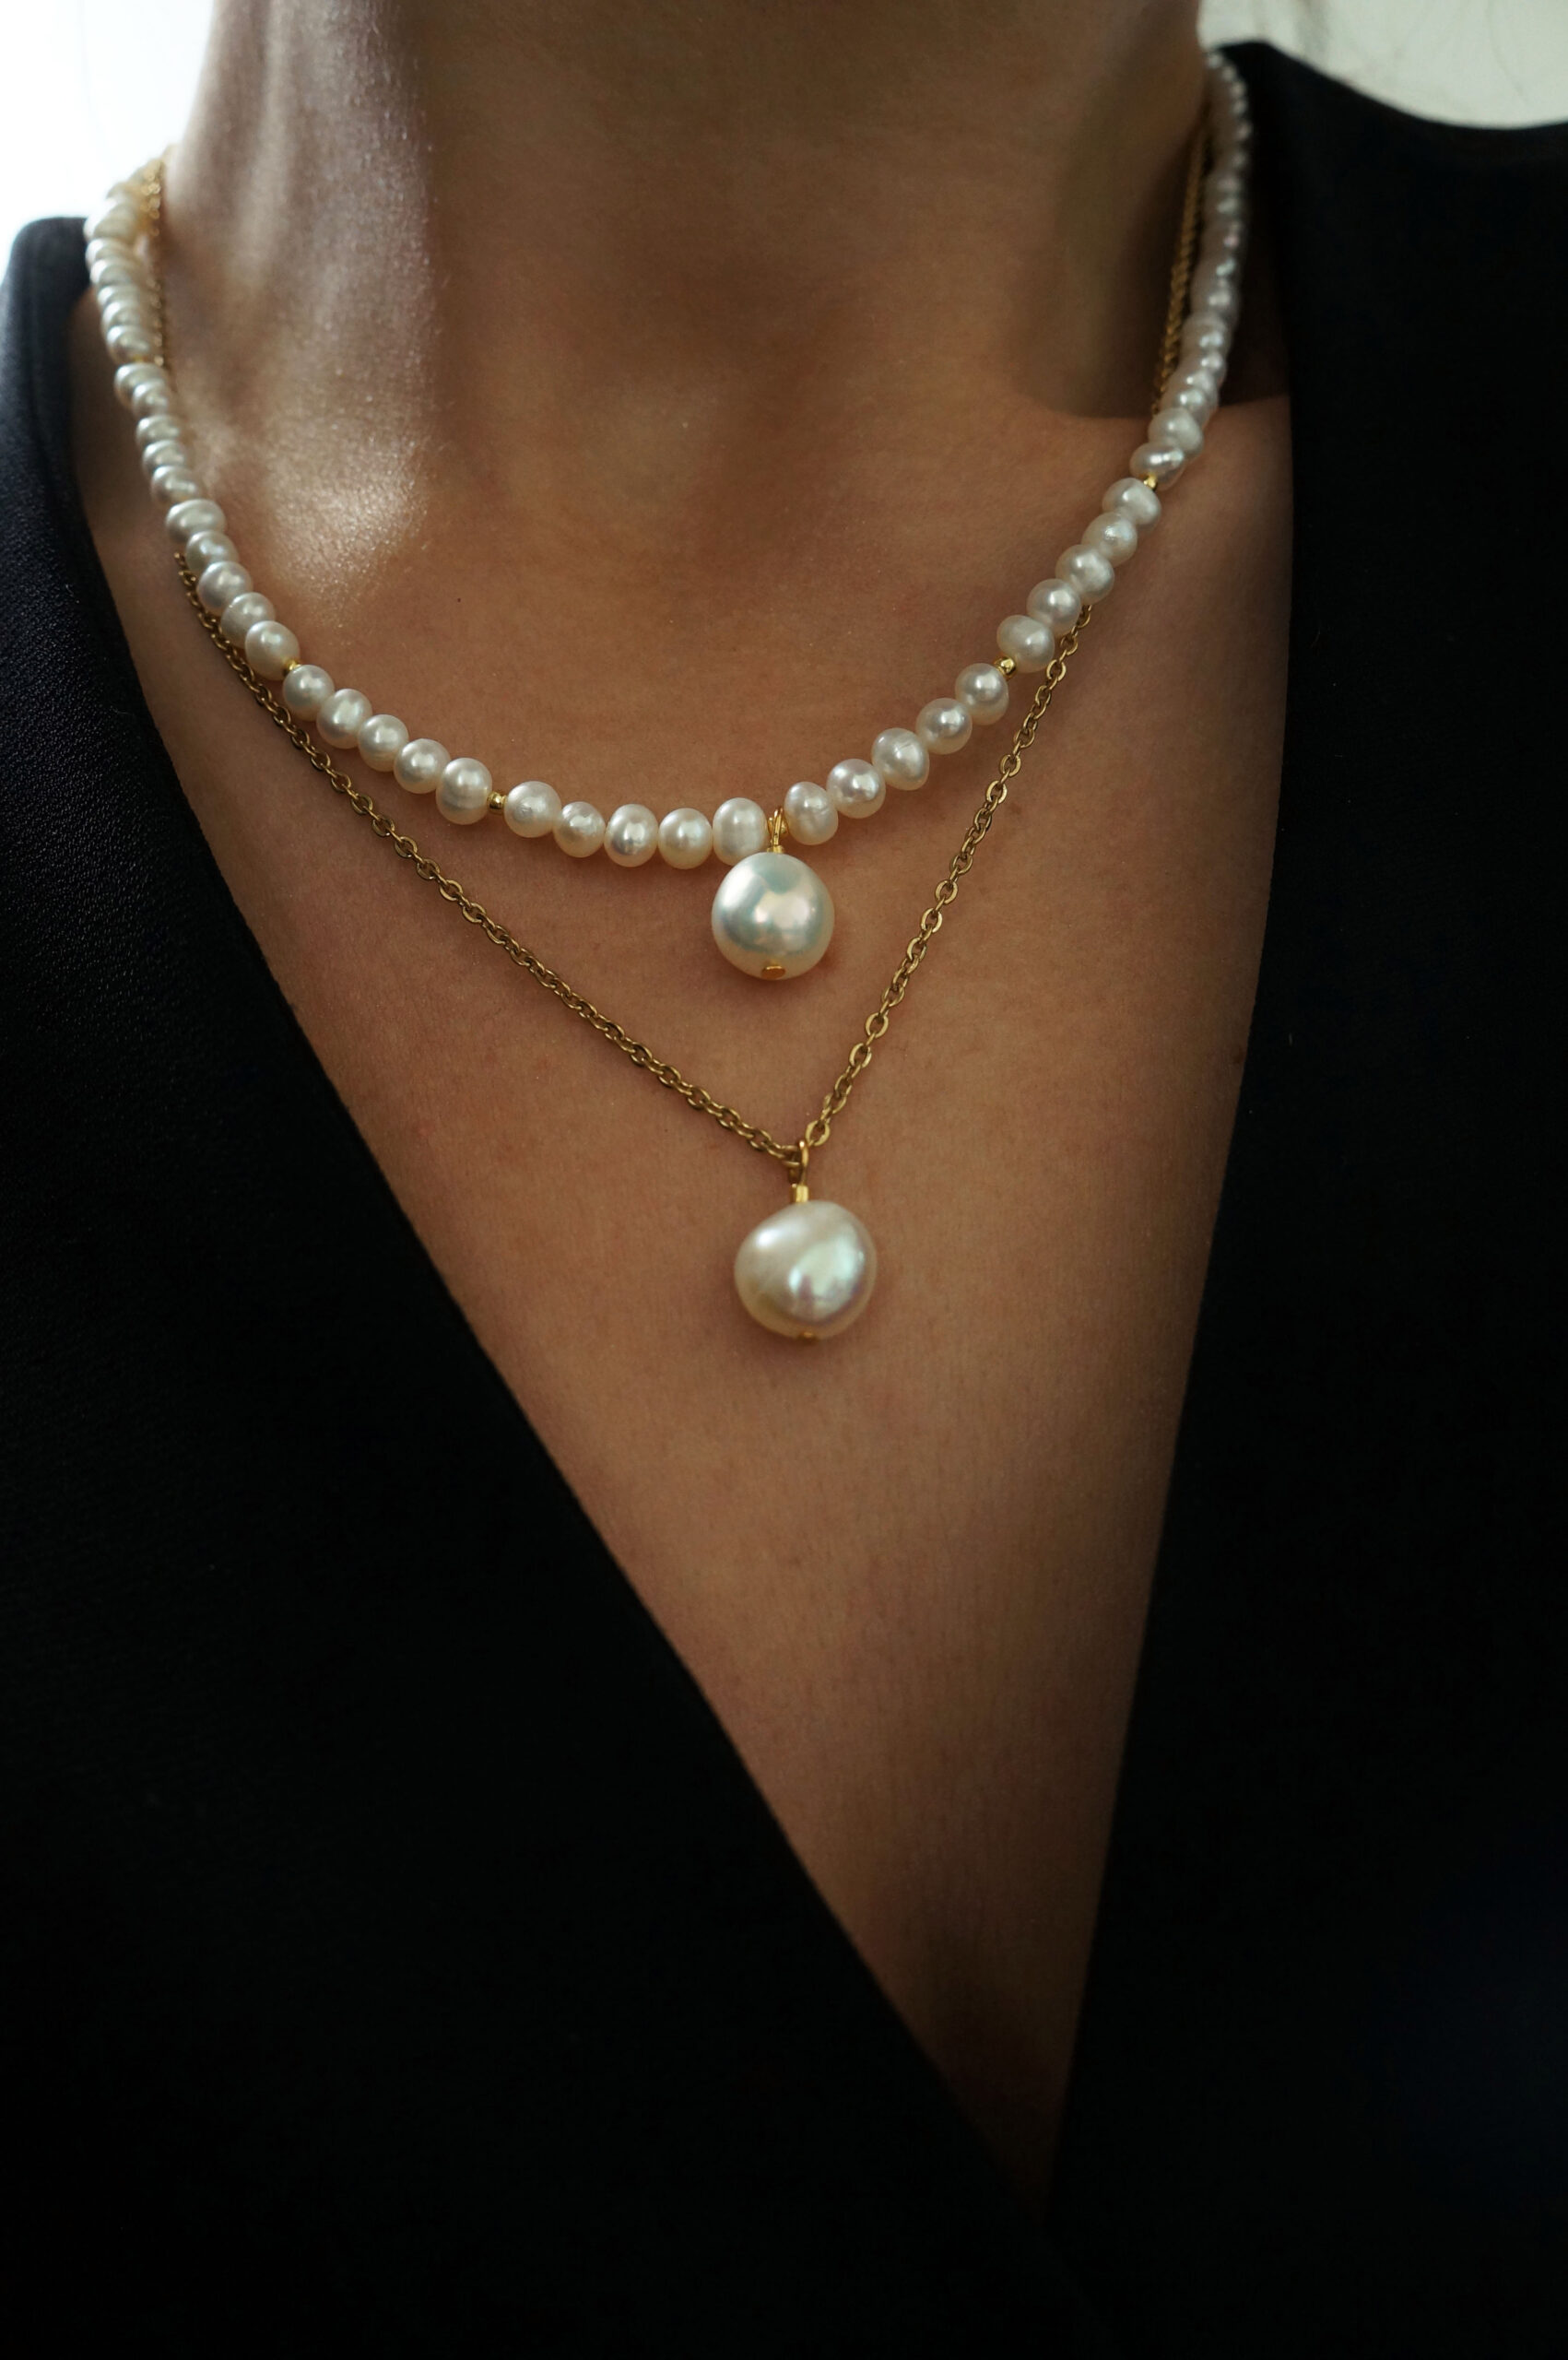 Cleaning and care tips for freshwater pearls|Maintain|Clean